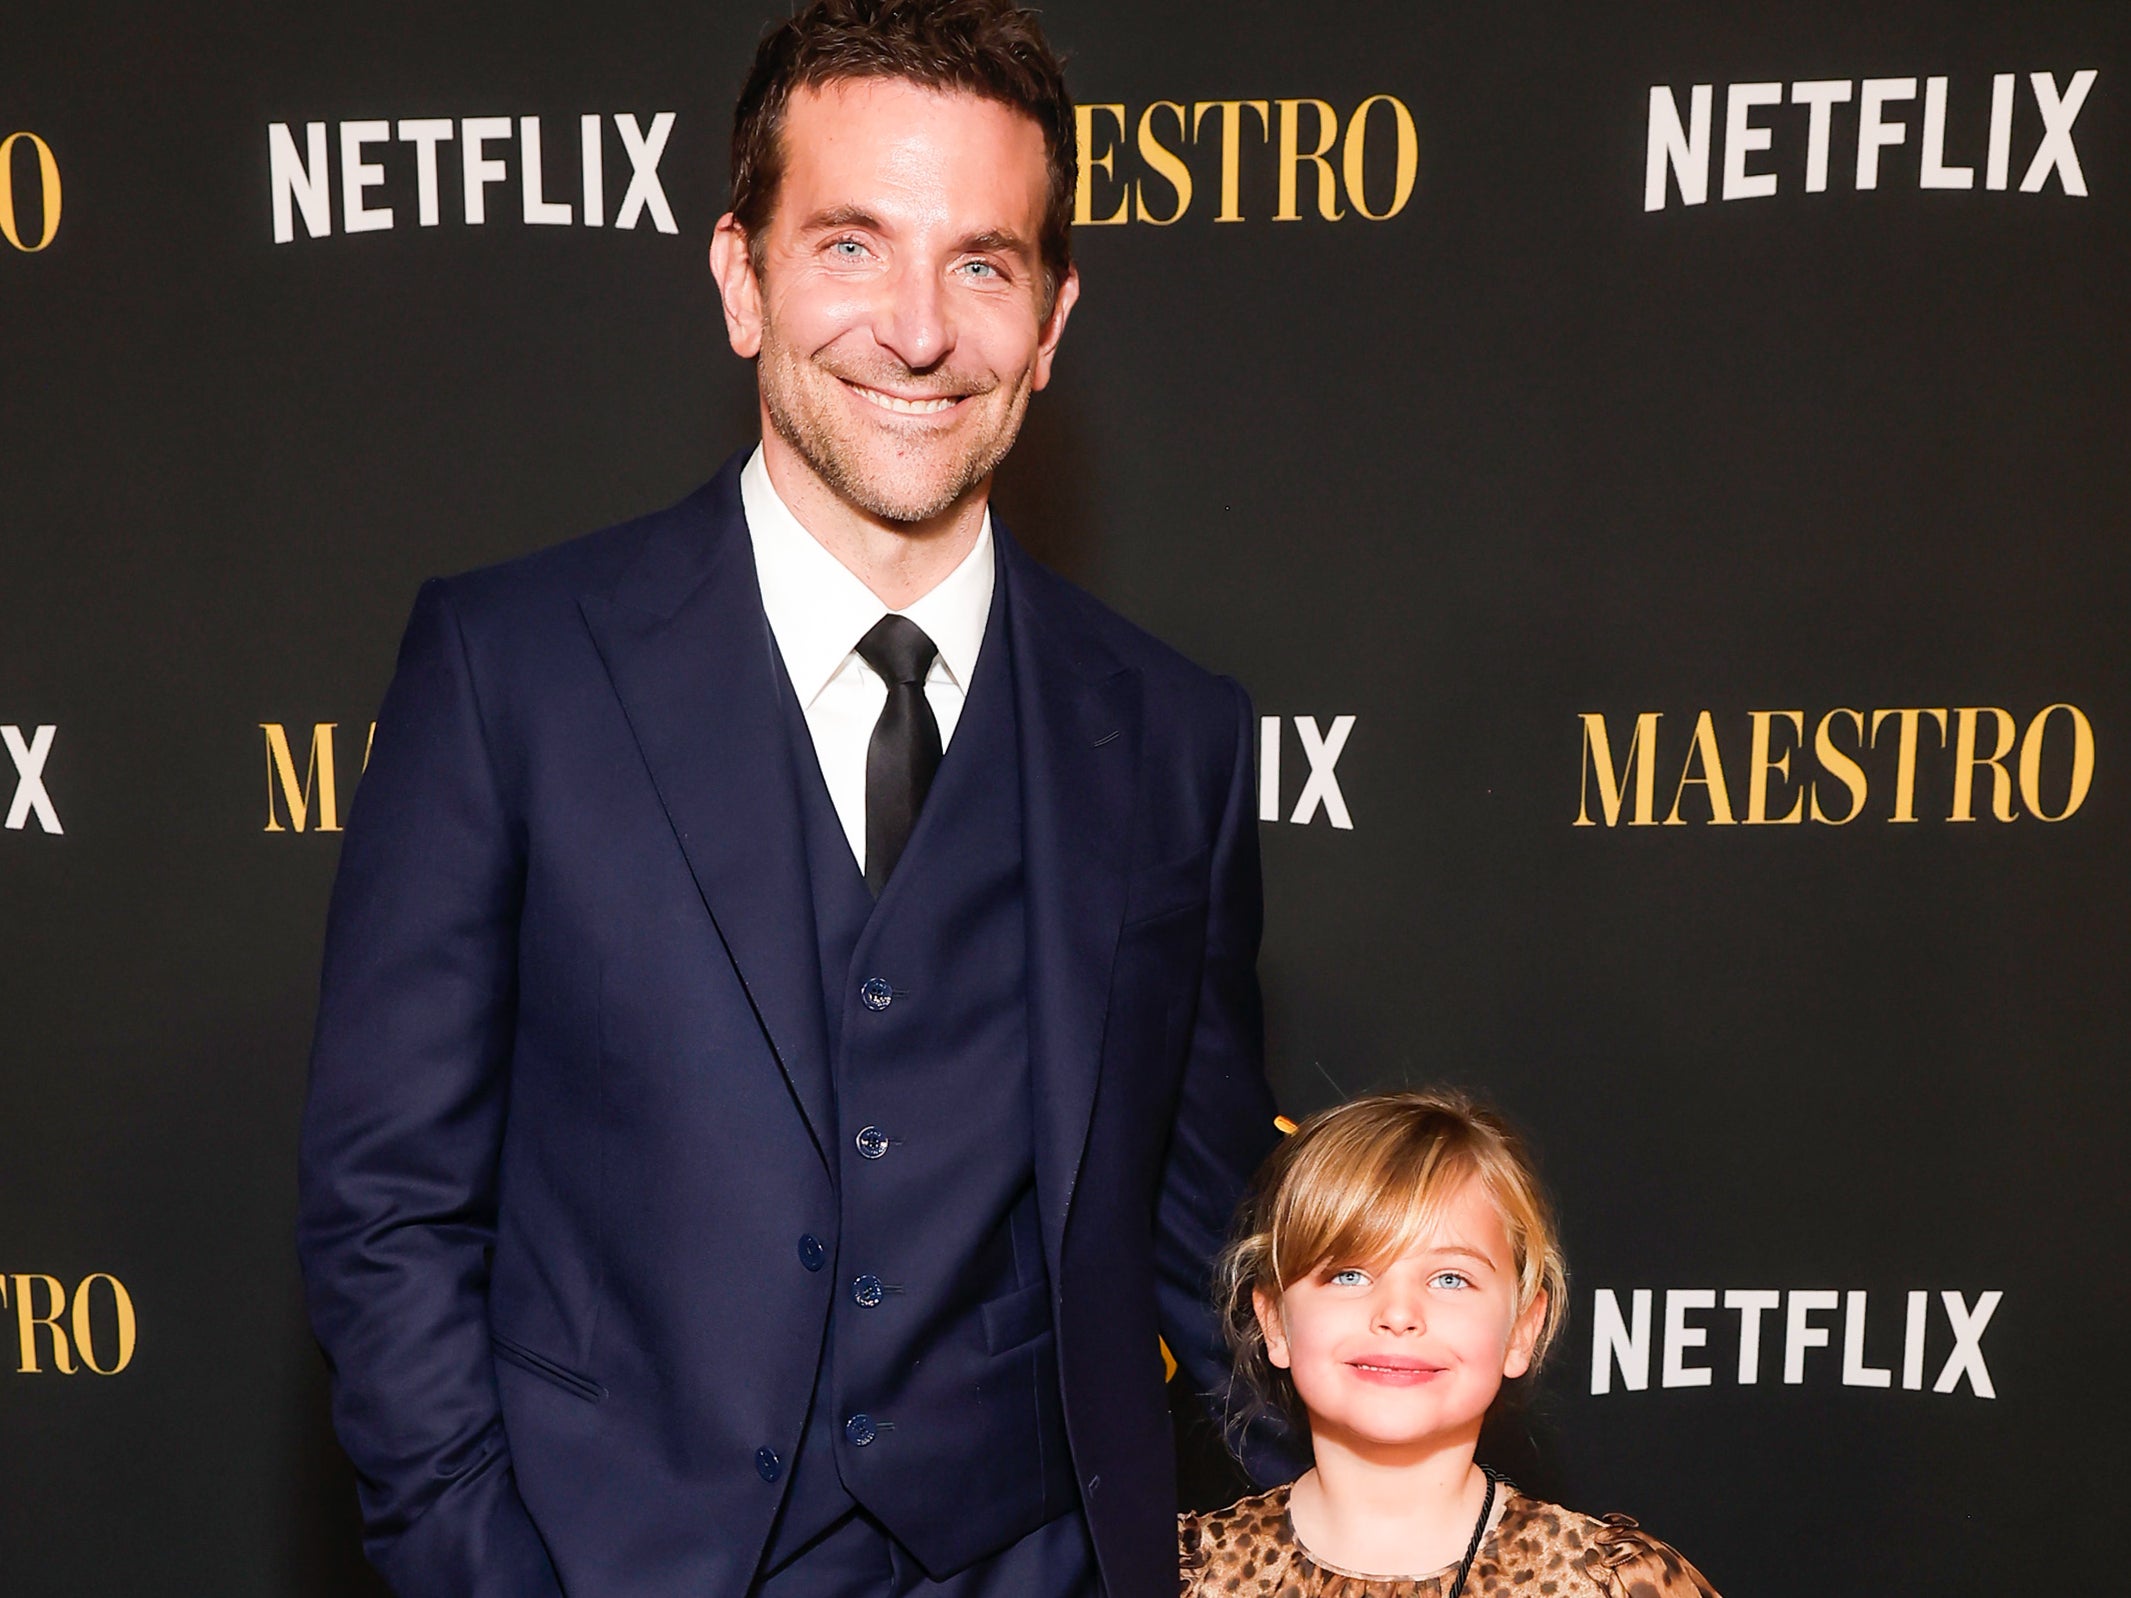 Maestro star Bradley Cooper 'rushes out' of New York press